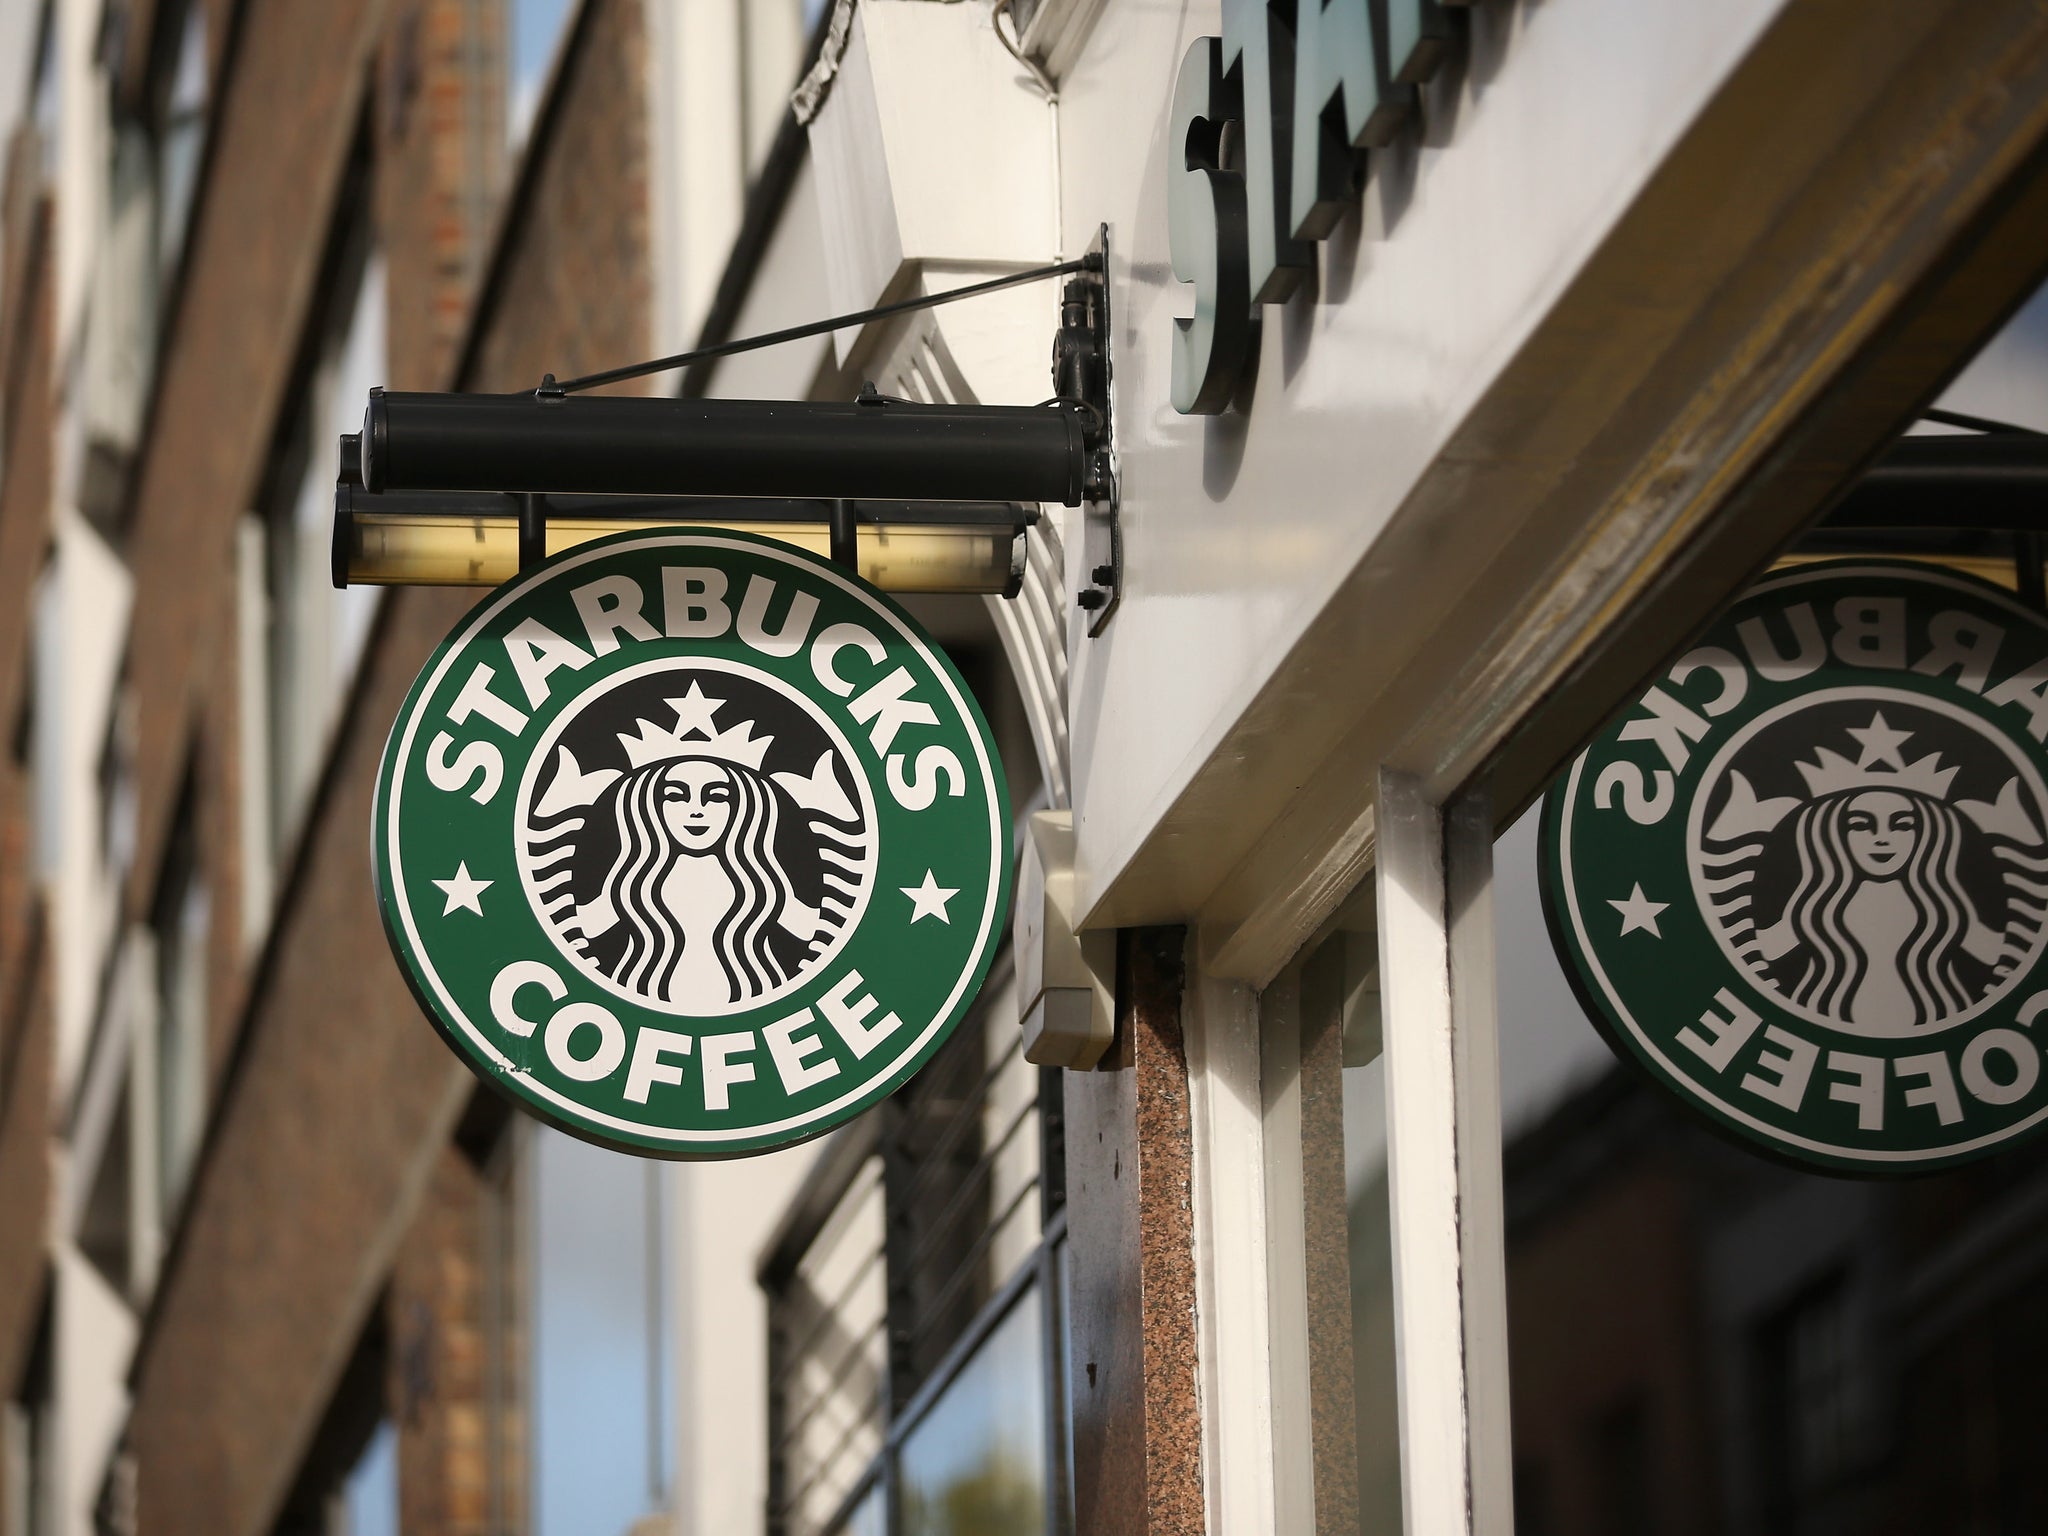 Starbucks will provide an interest-free loan to pay a rental deposit that should be repaid within 12 months. 